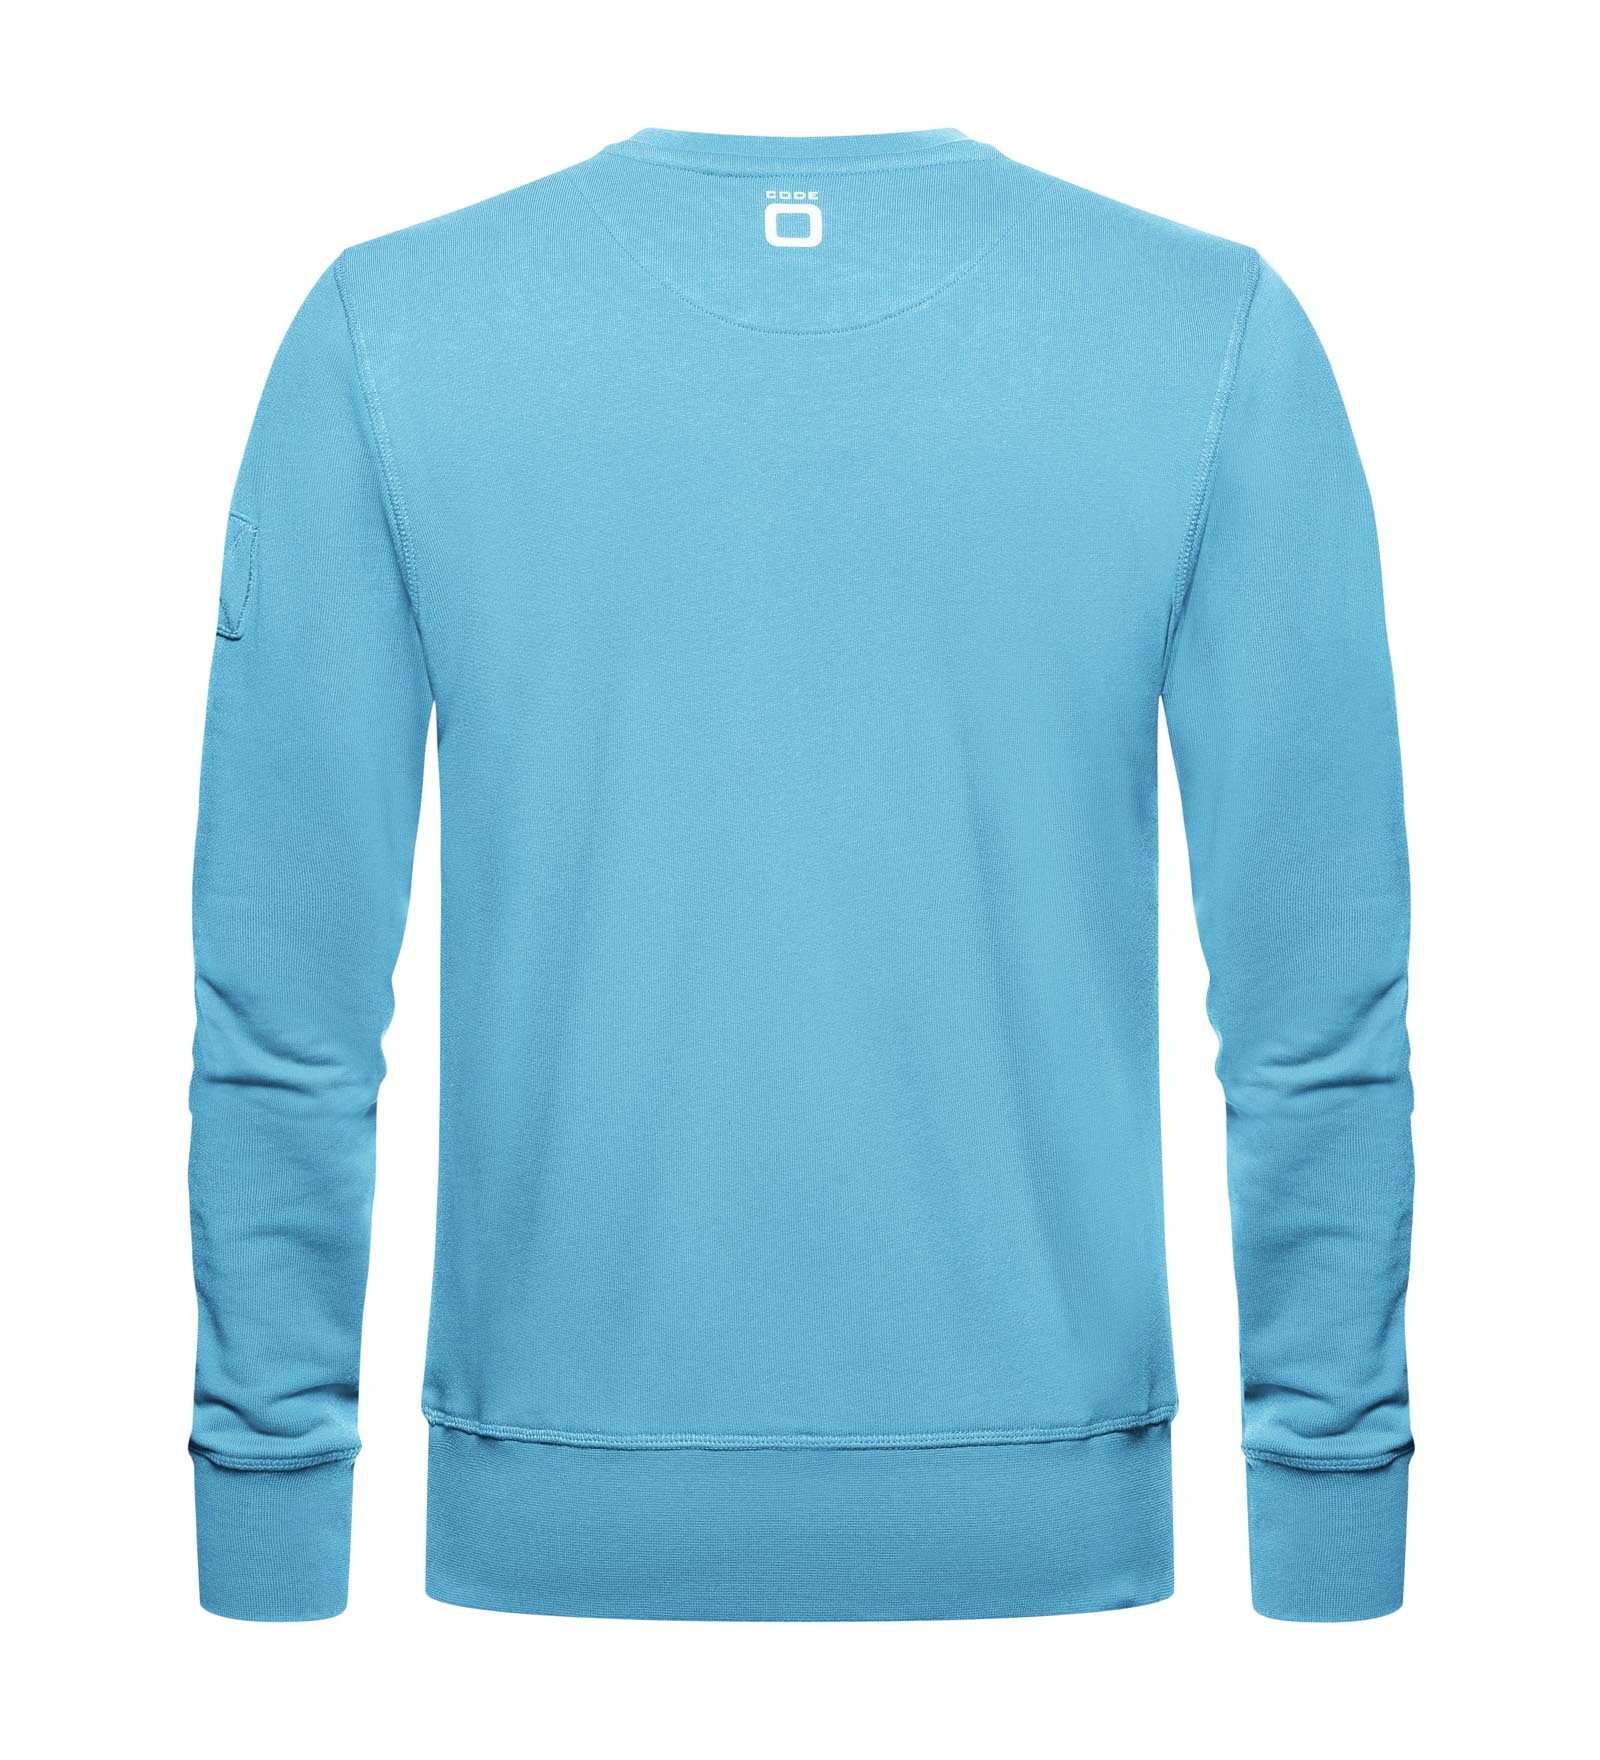 Sweat-shirt Turquoise pour Hommes 